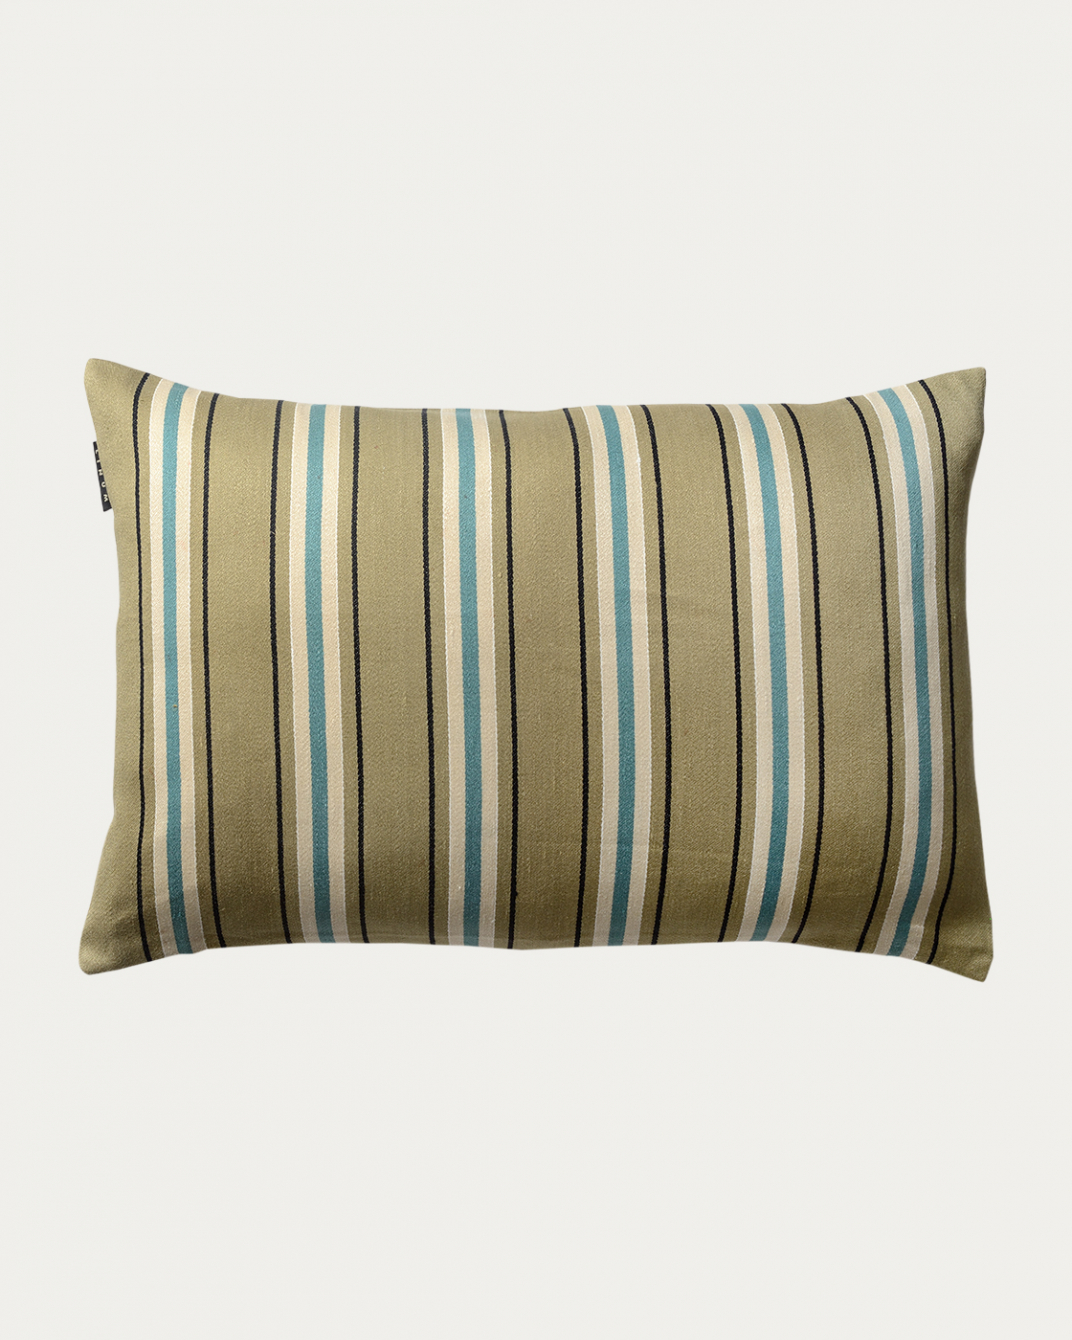 LUCCA Cushion cover 40x60 cm Soft grey green